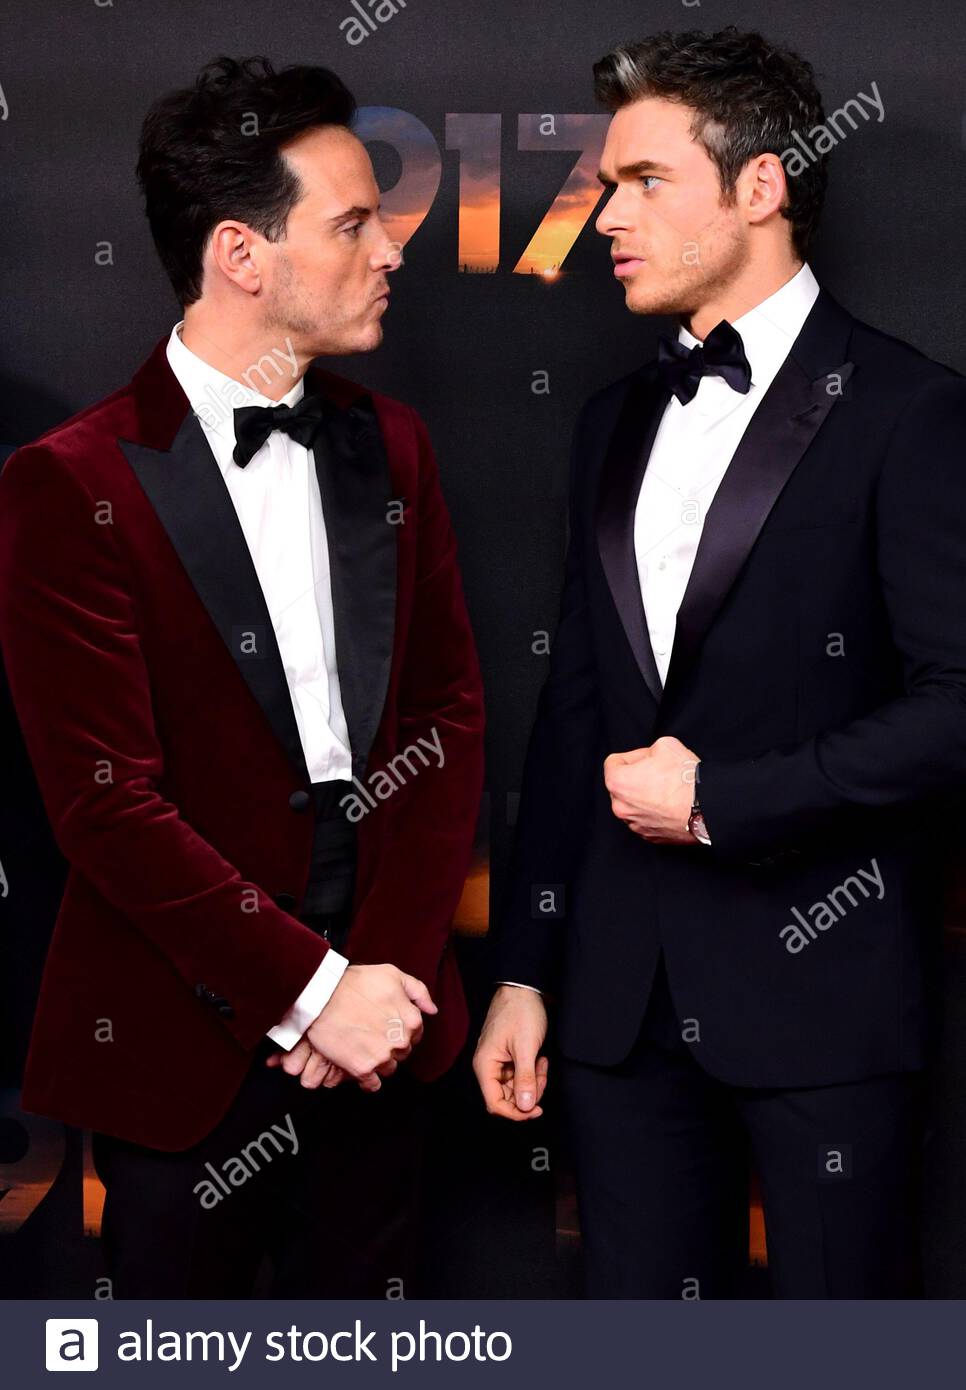 andrew-scott-left-and-richard-madden-attending-the-1917-world-premiere-at-leicester-square-london-2ADMJAY.jpg